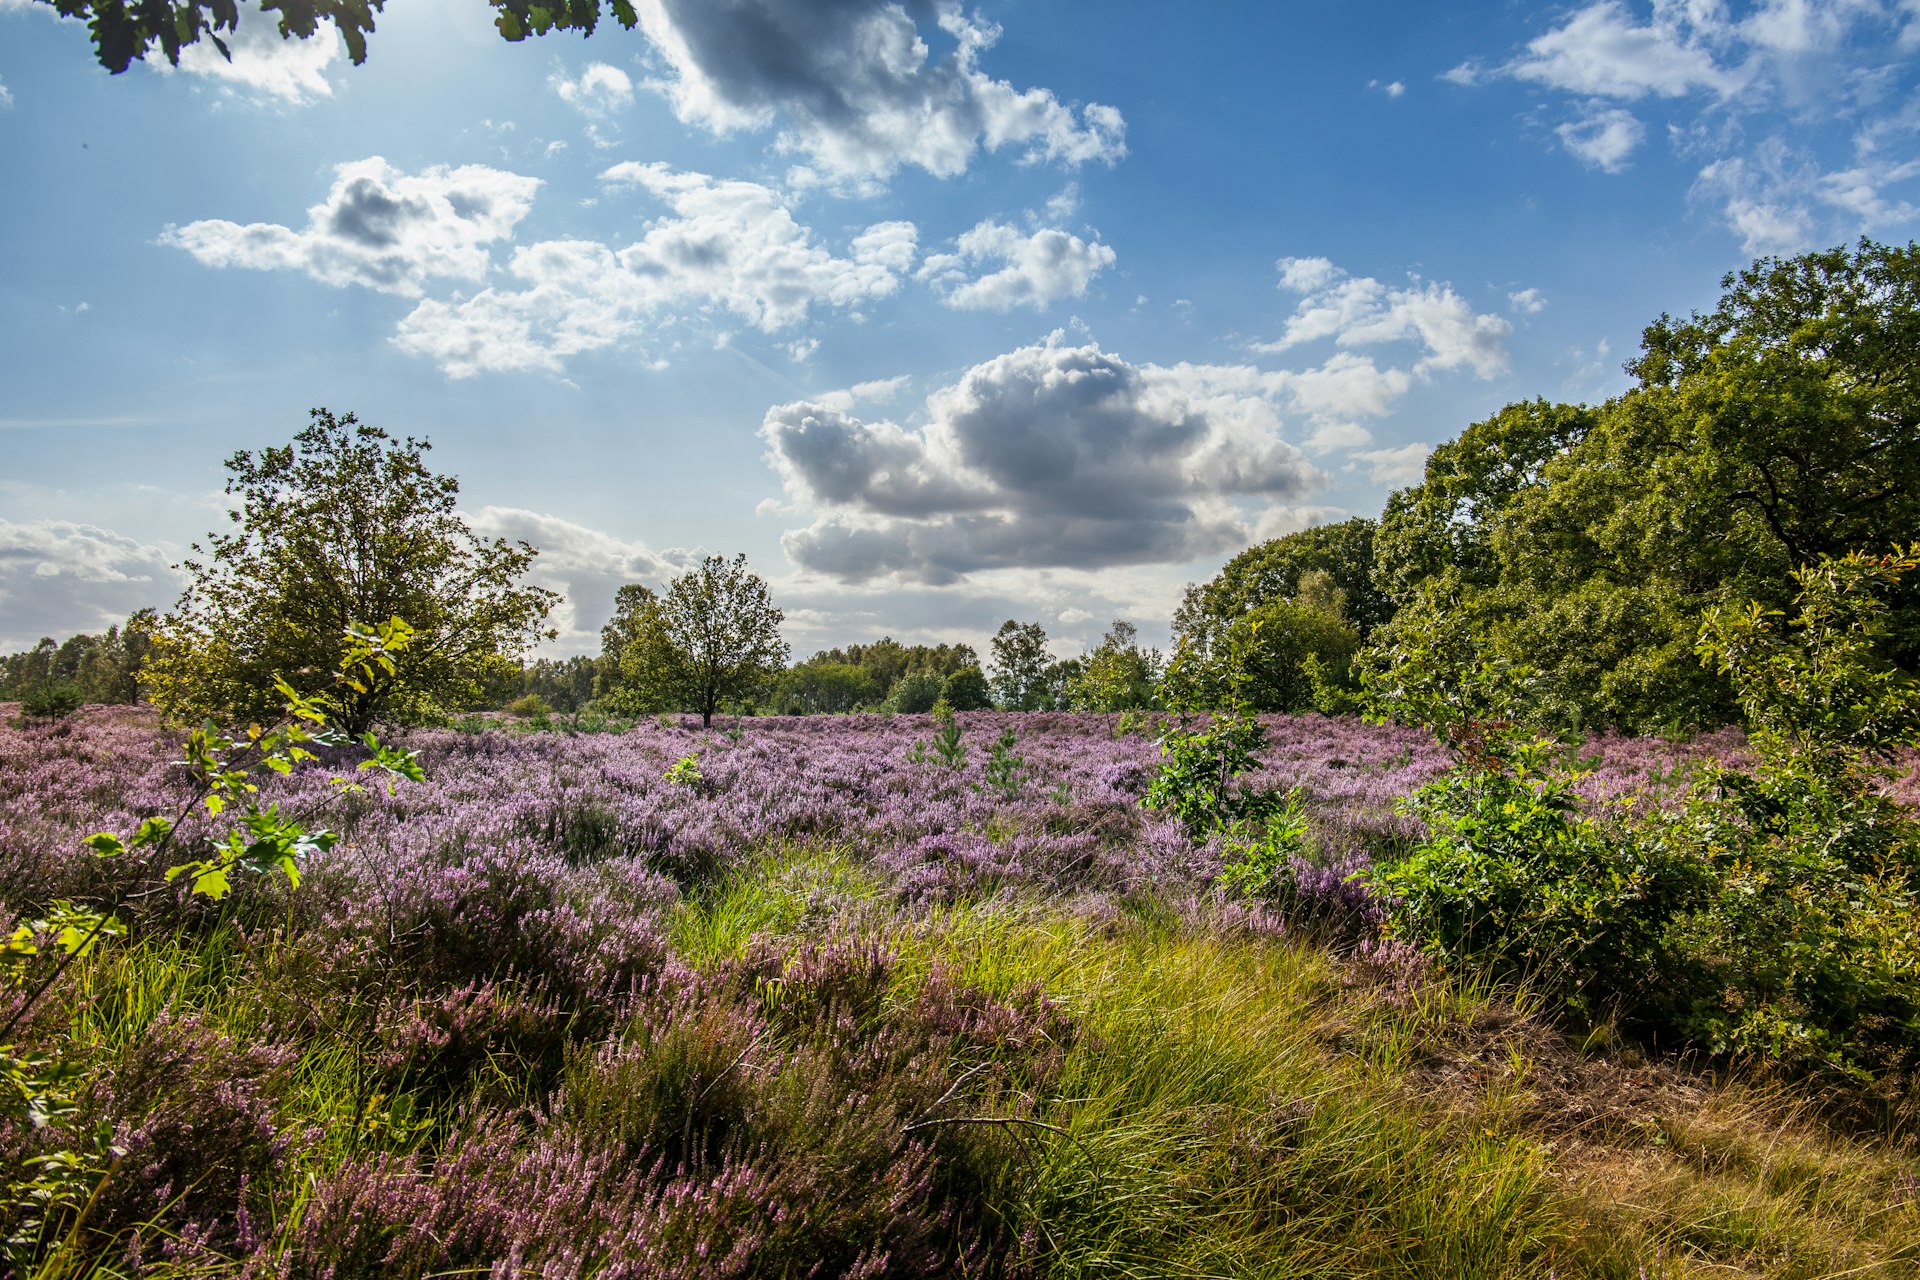 Green countryside and purple heather flowers in Hoge Kempen National Park near the town of Maasmechelen